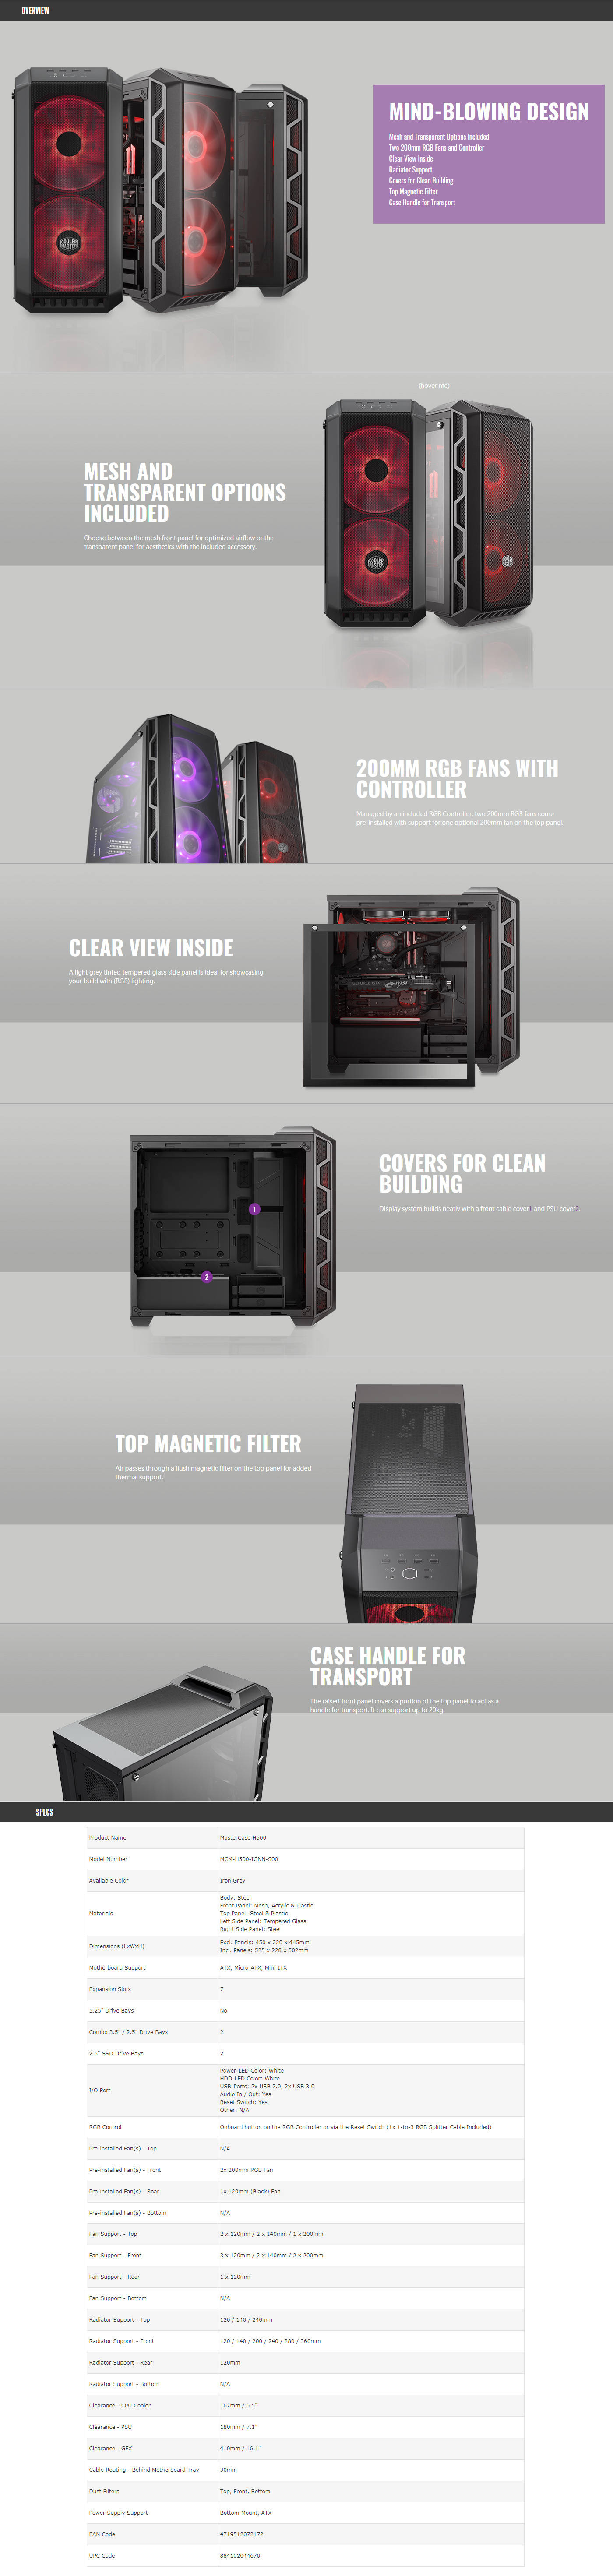  Buy Online Cooler Master MasterCase H500 Mid Tower Case - Iron Grey (MCM-H500-IGNN-S00)